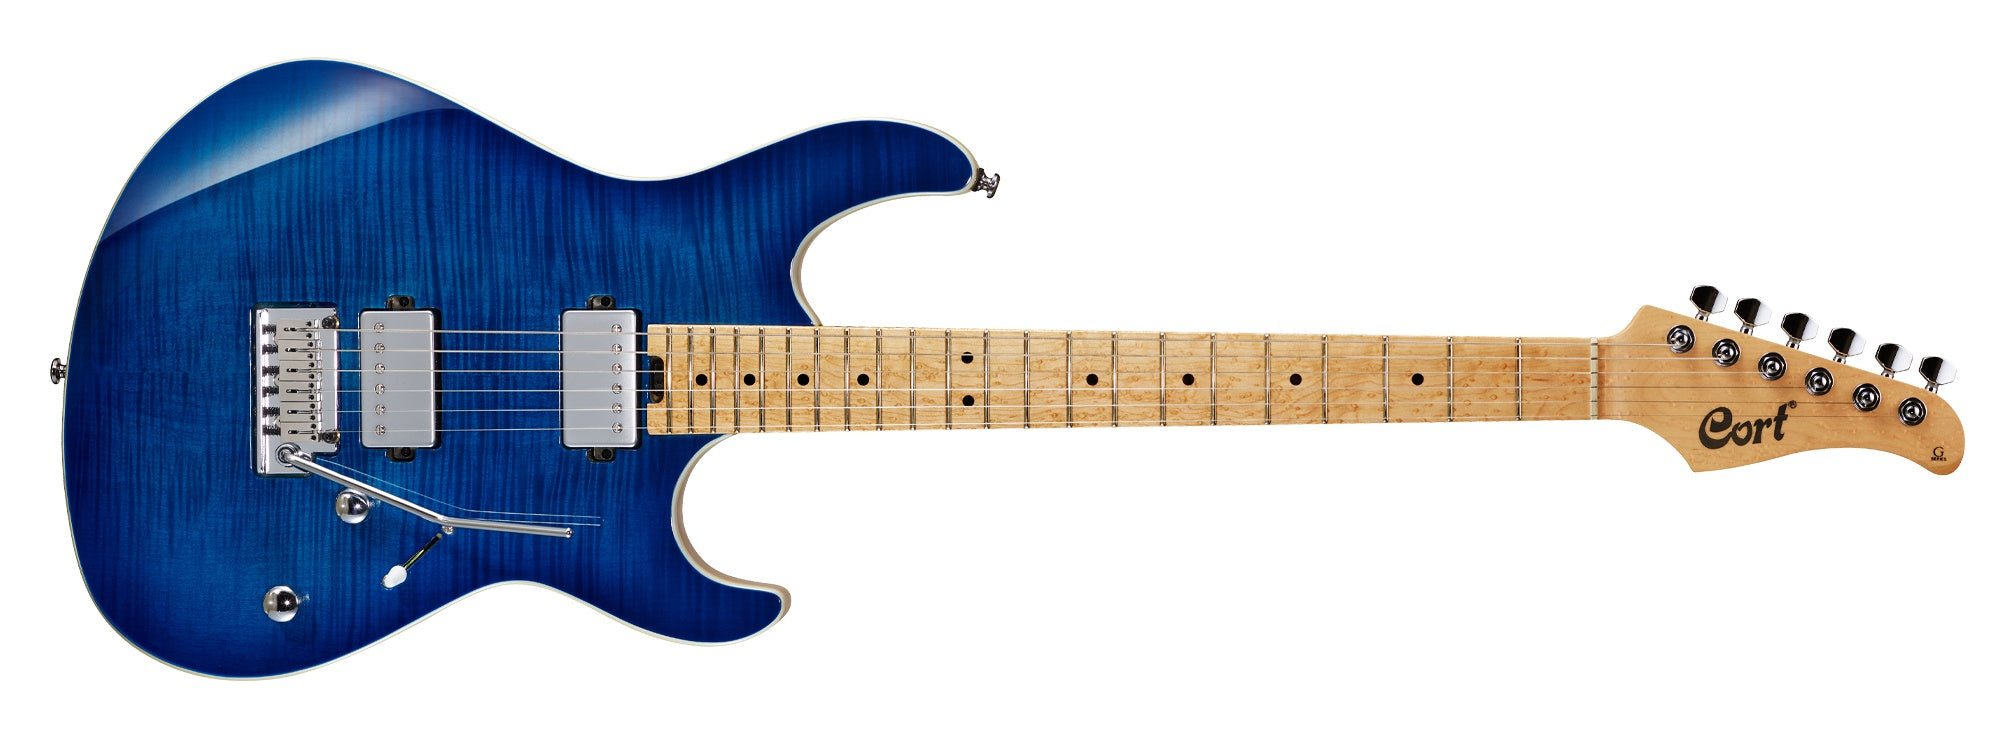 Cort G290 FAT II Bright Blue Burst, Electric Guitar for sale at Richards Guitars.